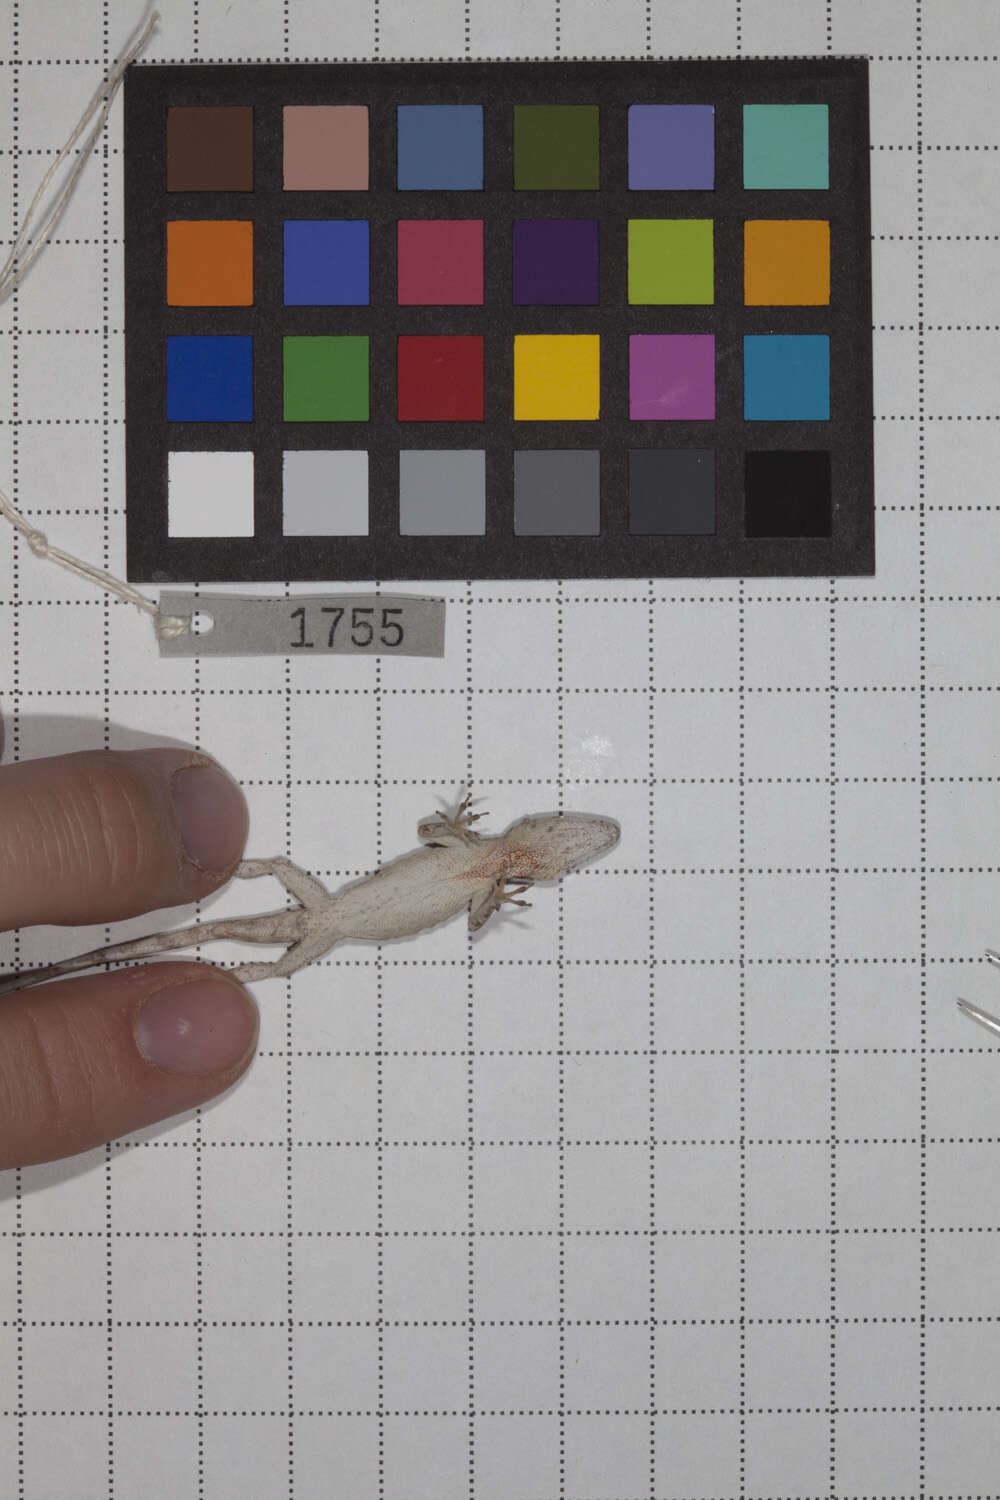 Image of Central Anole